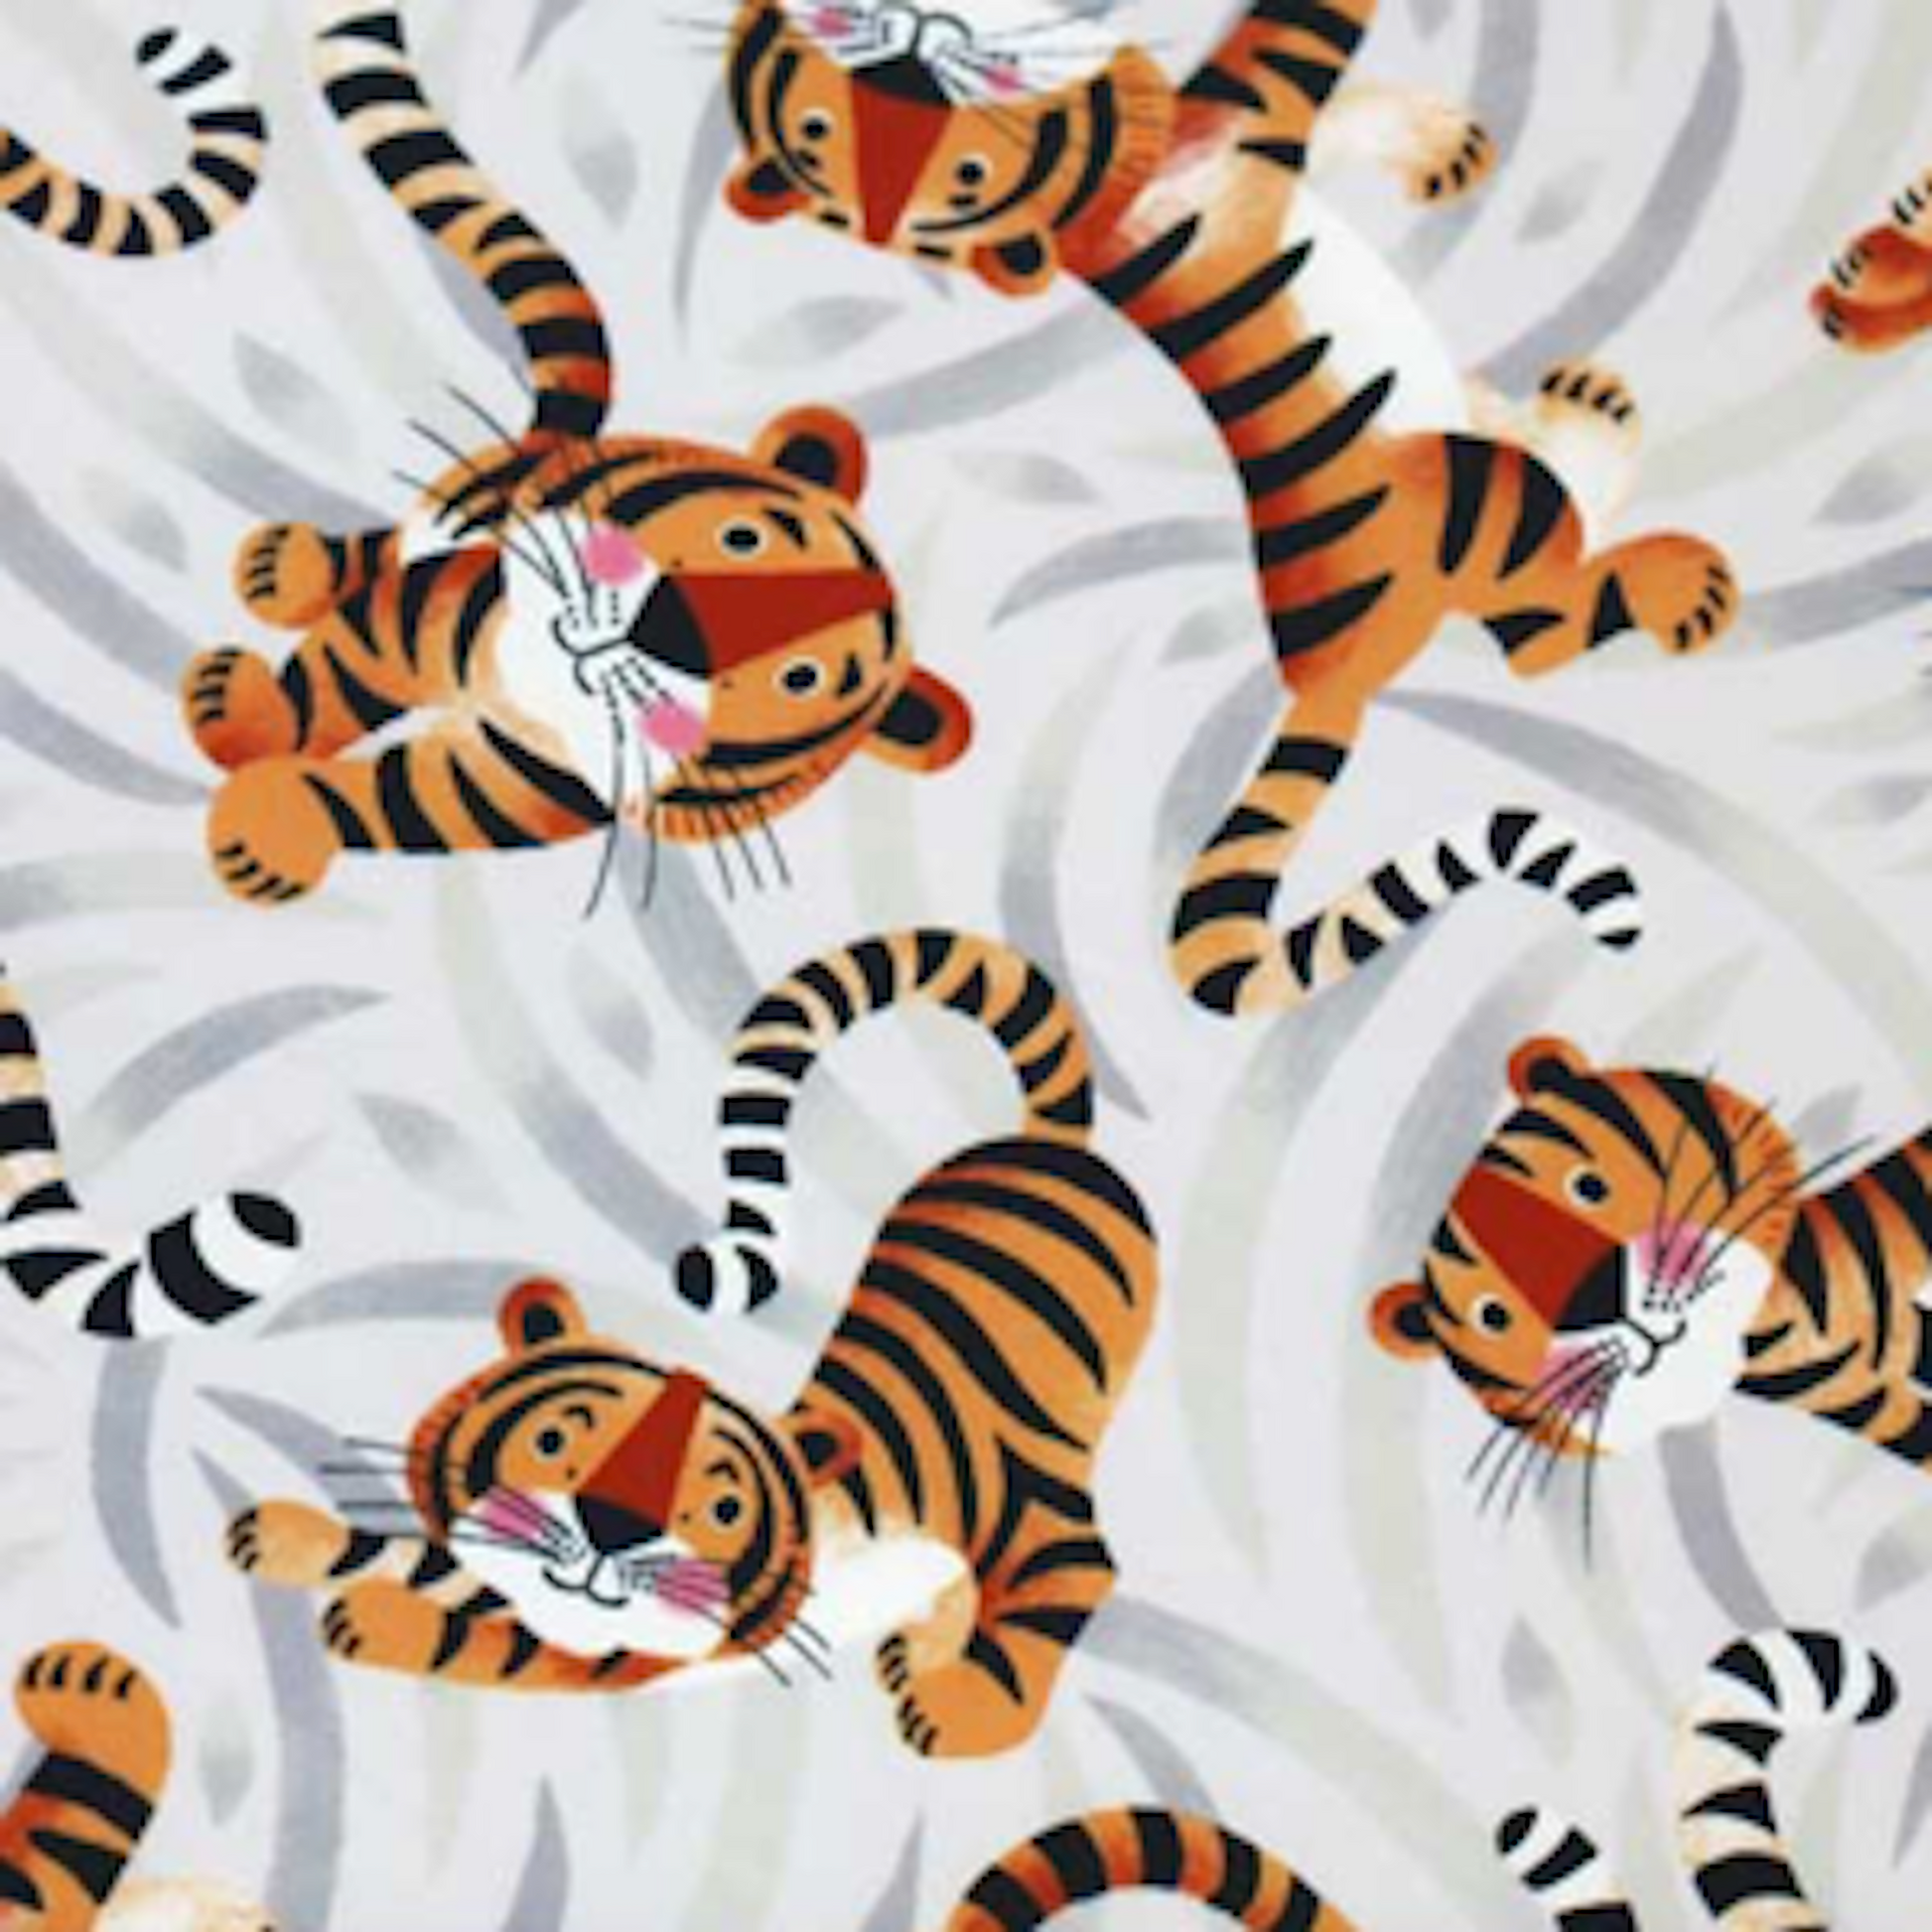 Tiger-patterned fabric designed for tigers special clothing needs